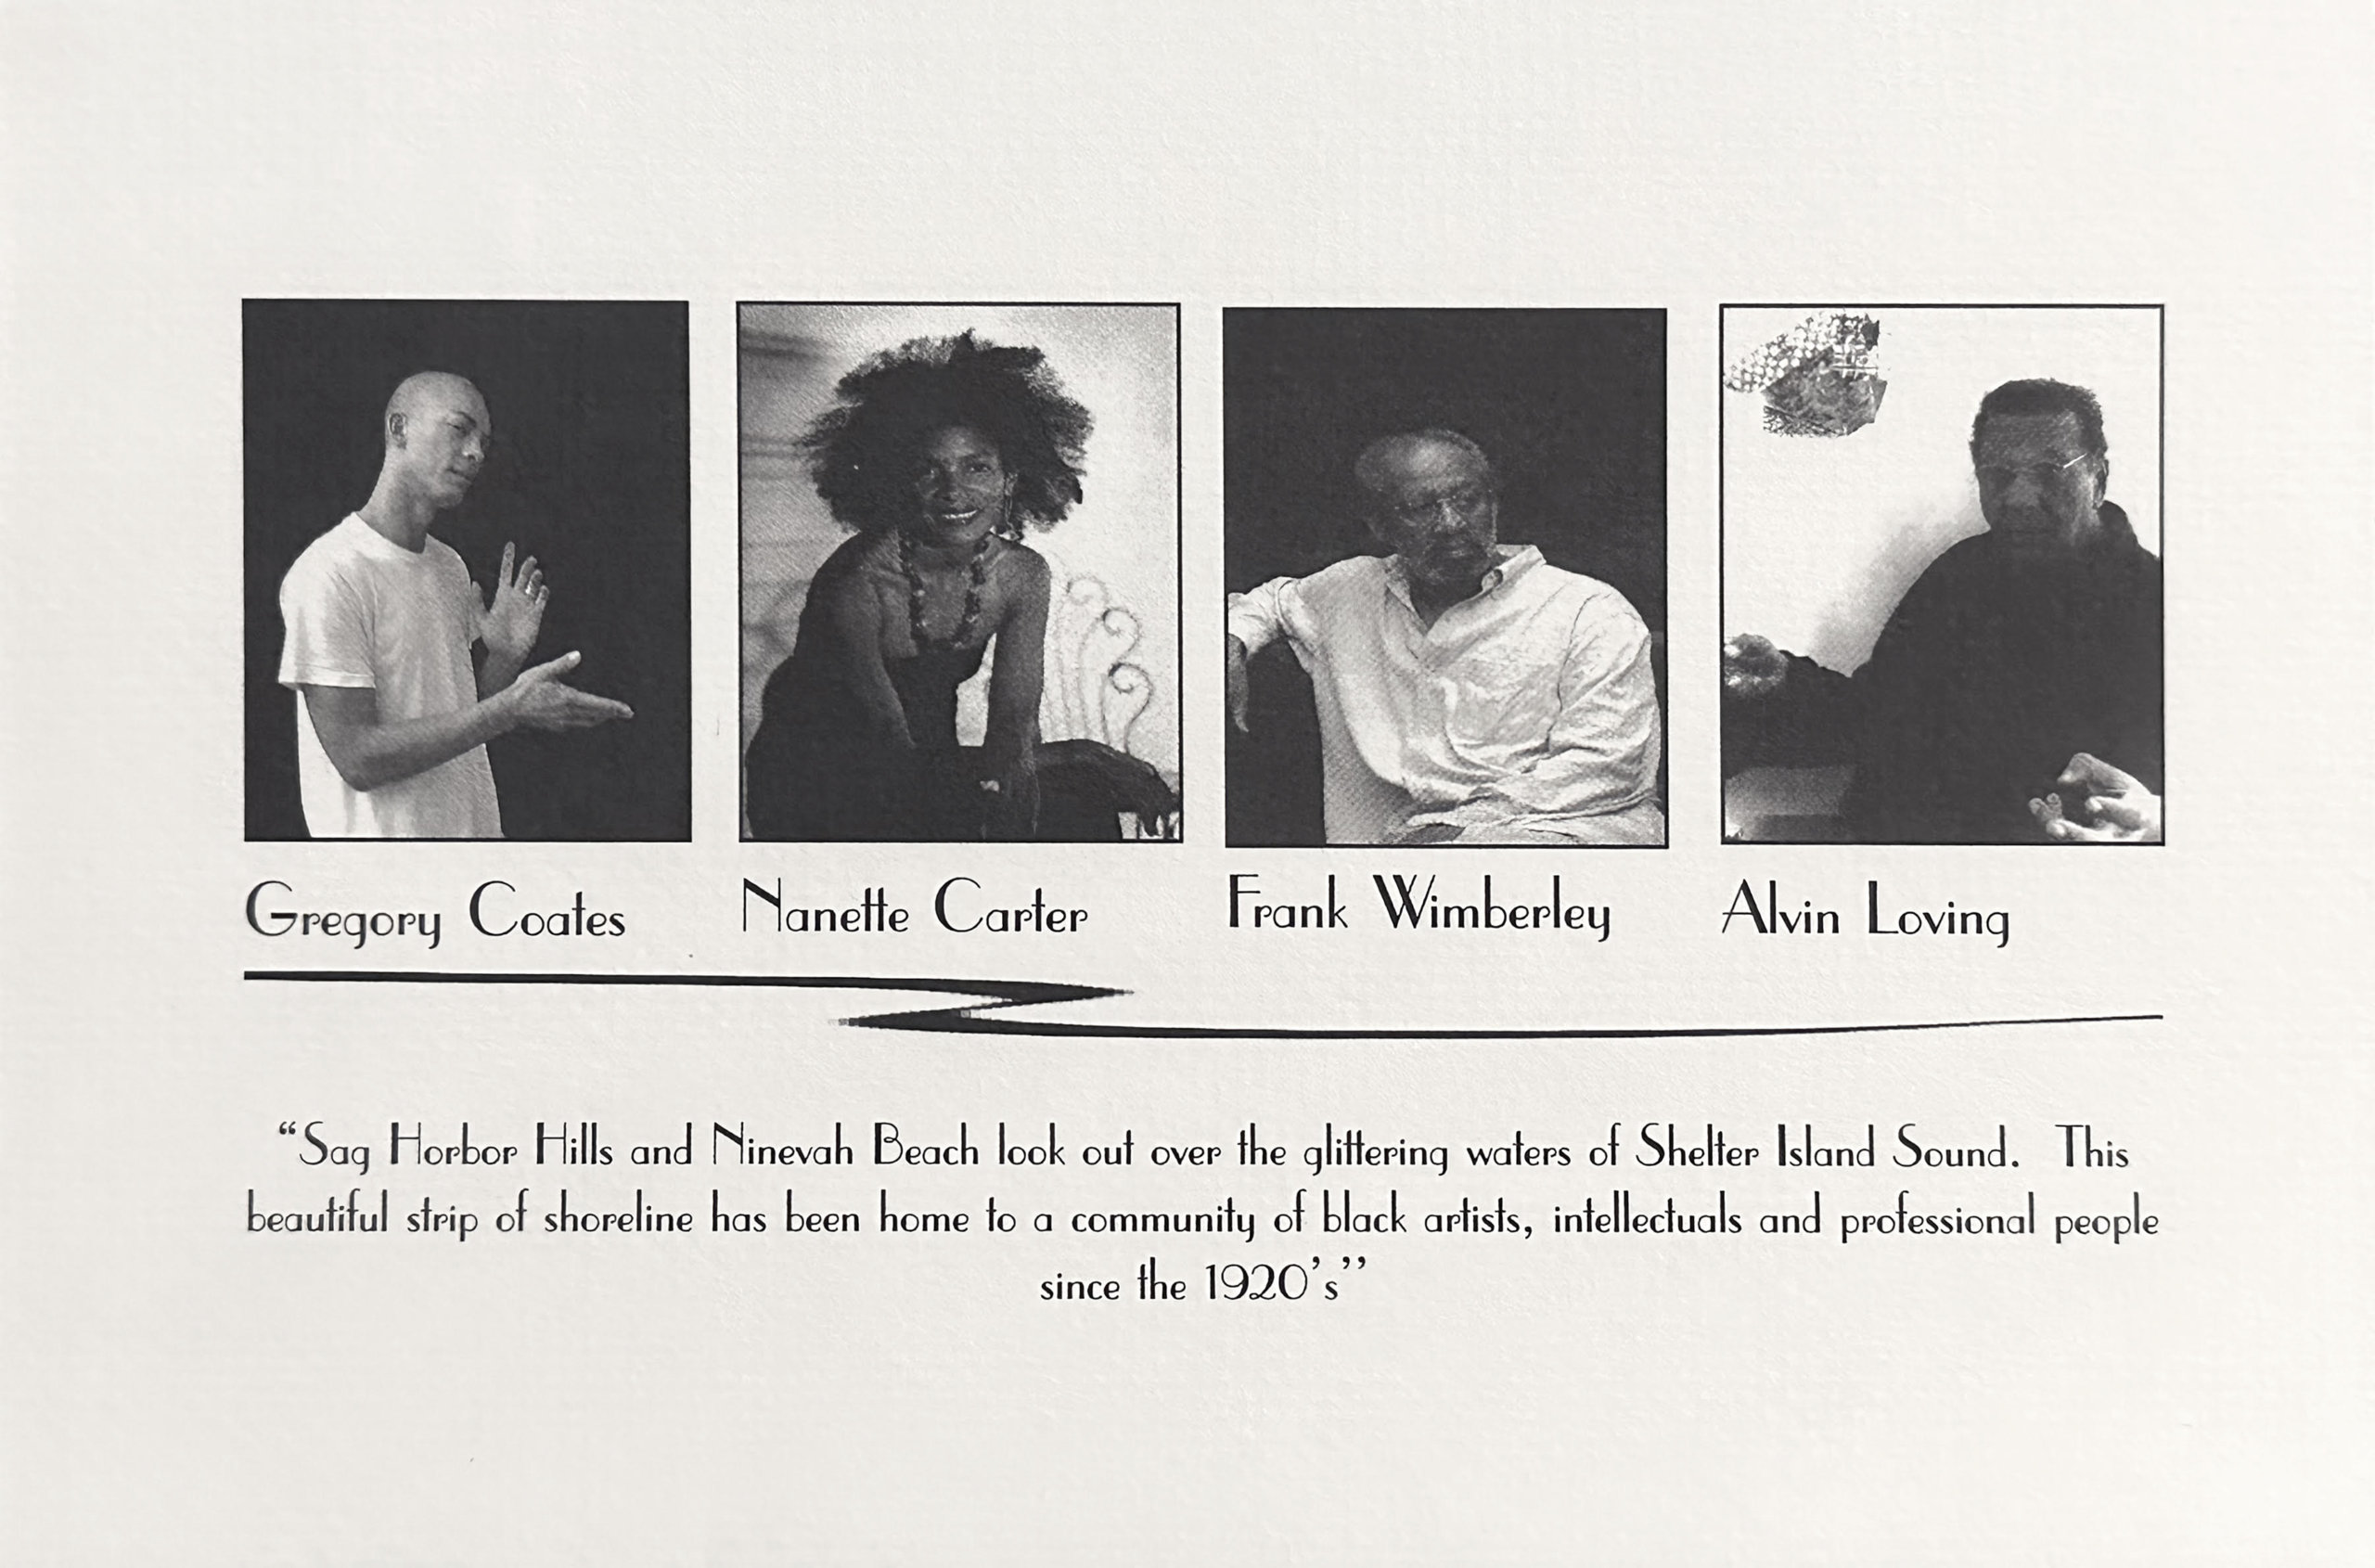 Original "A Place by the Sea' exhibition poster from 1999 with four Black artists connected to Sag Harbor - Gregory Coates, Nanette Carter, Frank Wimberley and Alvin Loving